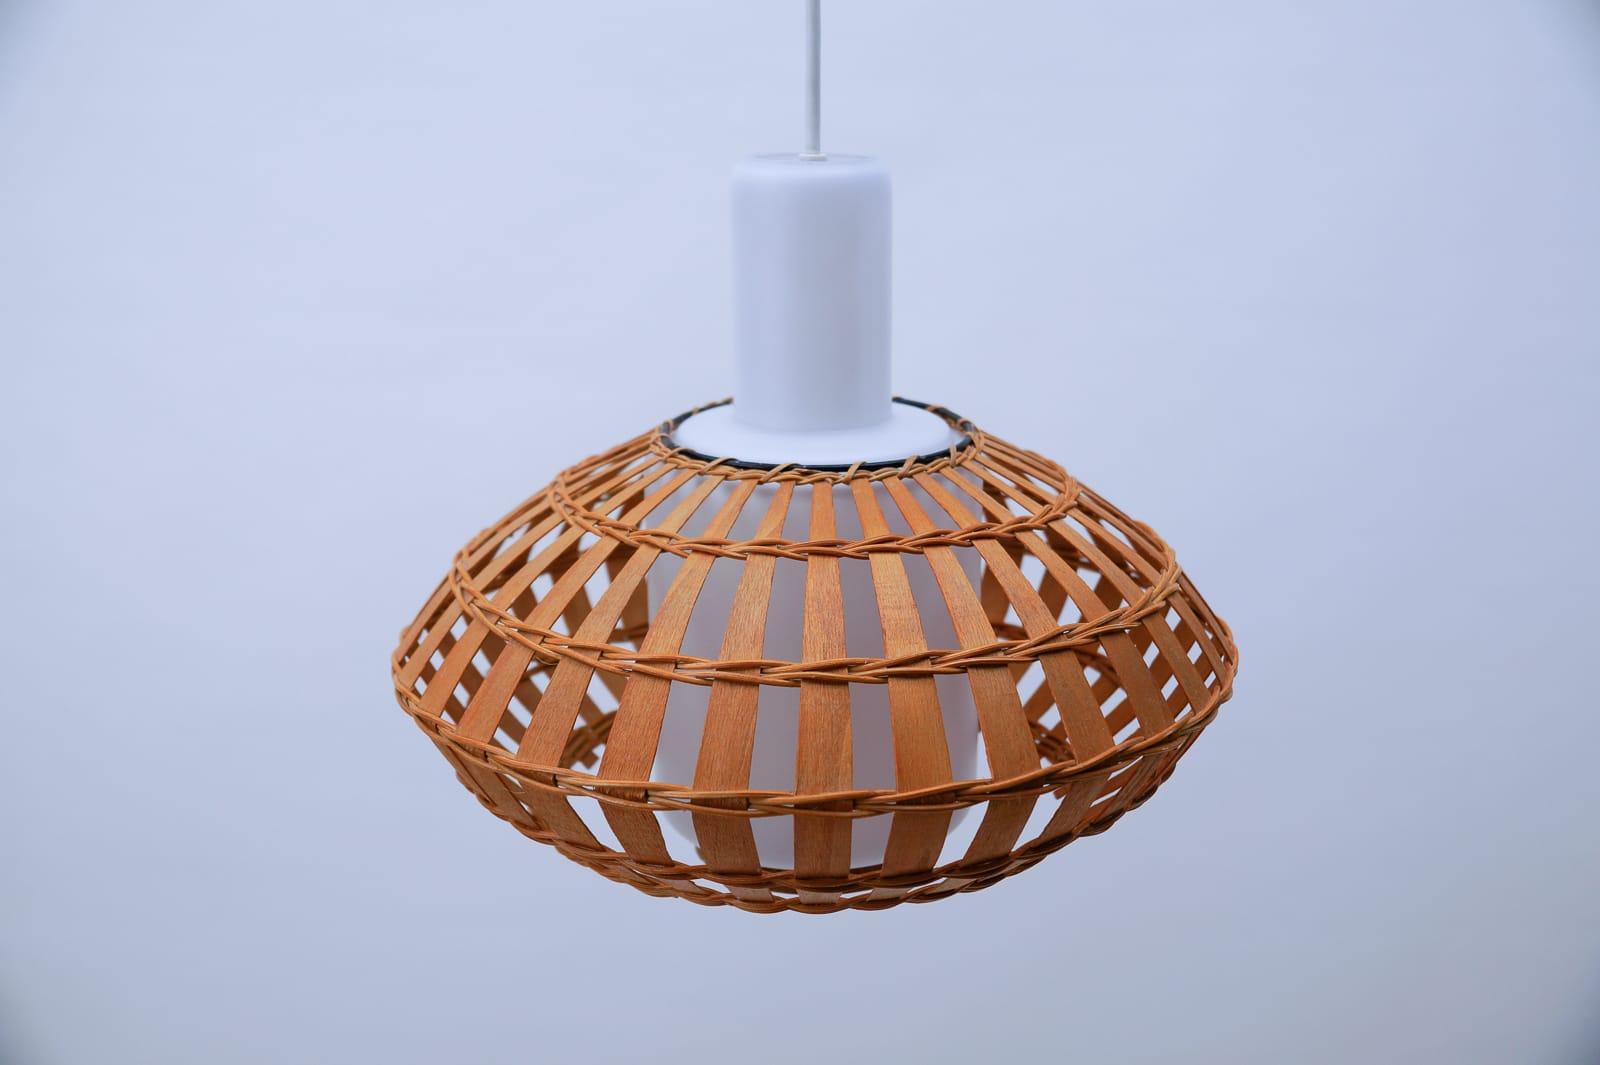 Opaline Glass and Wicker Ceiling Lamp, 1960s For Sale 1